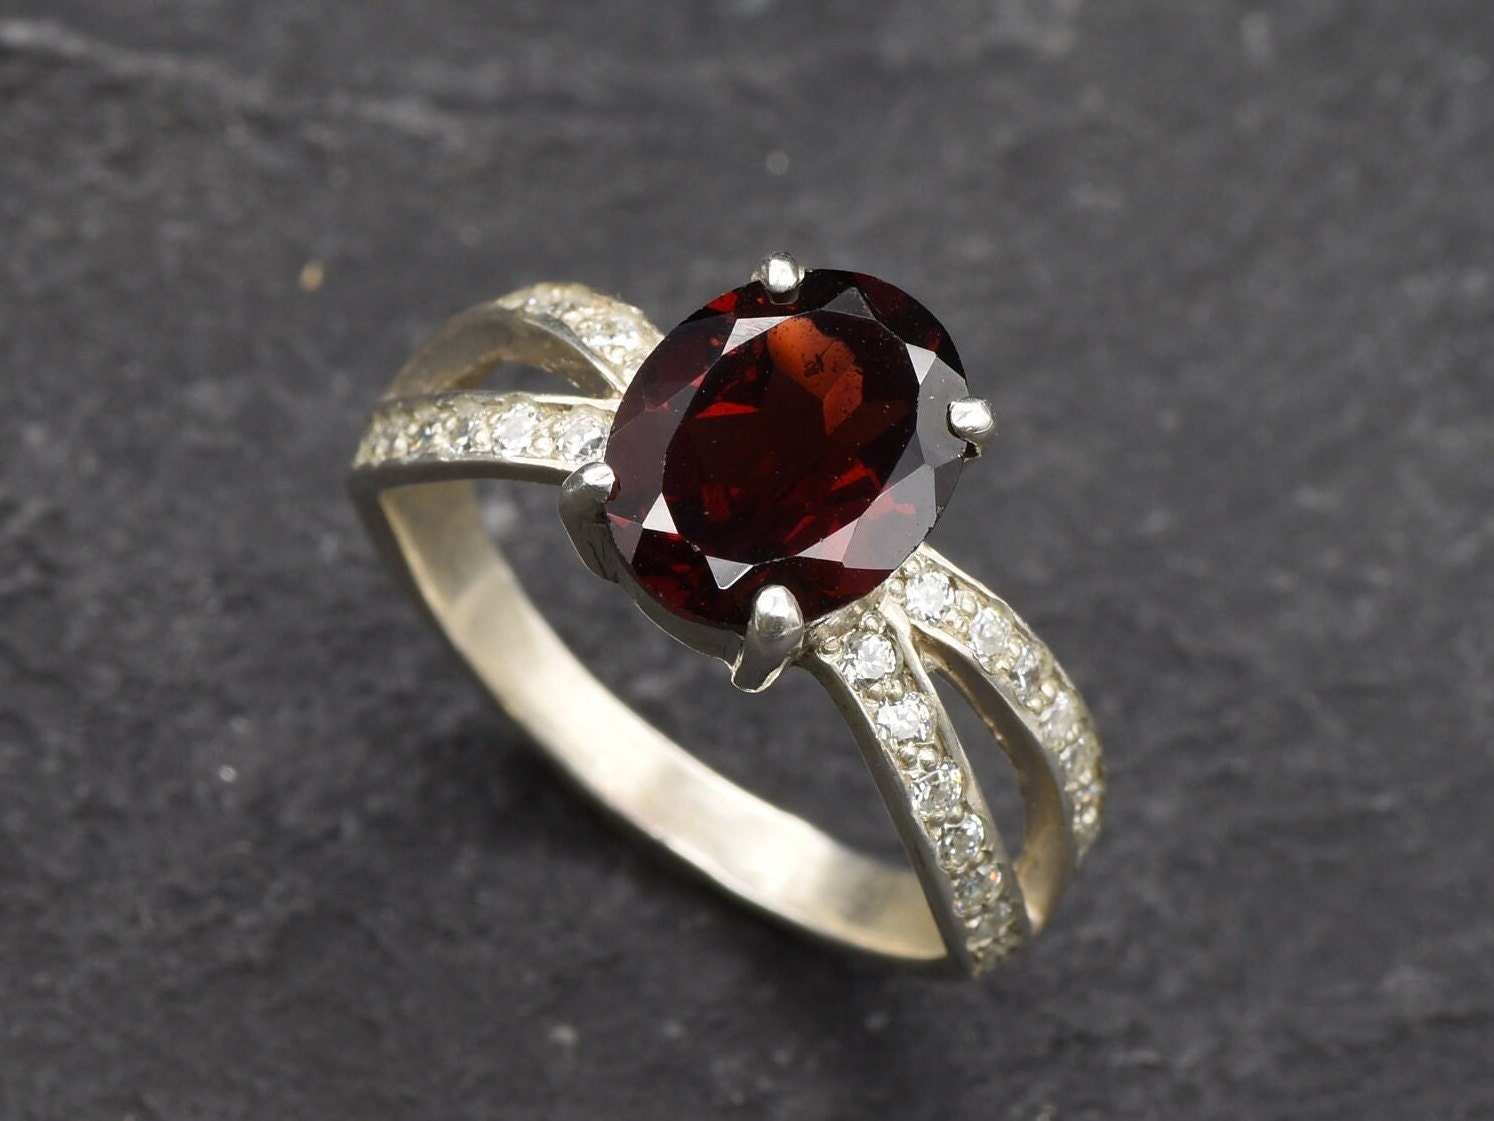 Garnet Ring, Natural Garnet, Antique Ring, January Birthstone, 3 Carat Ring, Red Promise Ring, Vintage Ring, Solitaire Ring, 925 Silver Ring